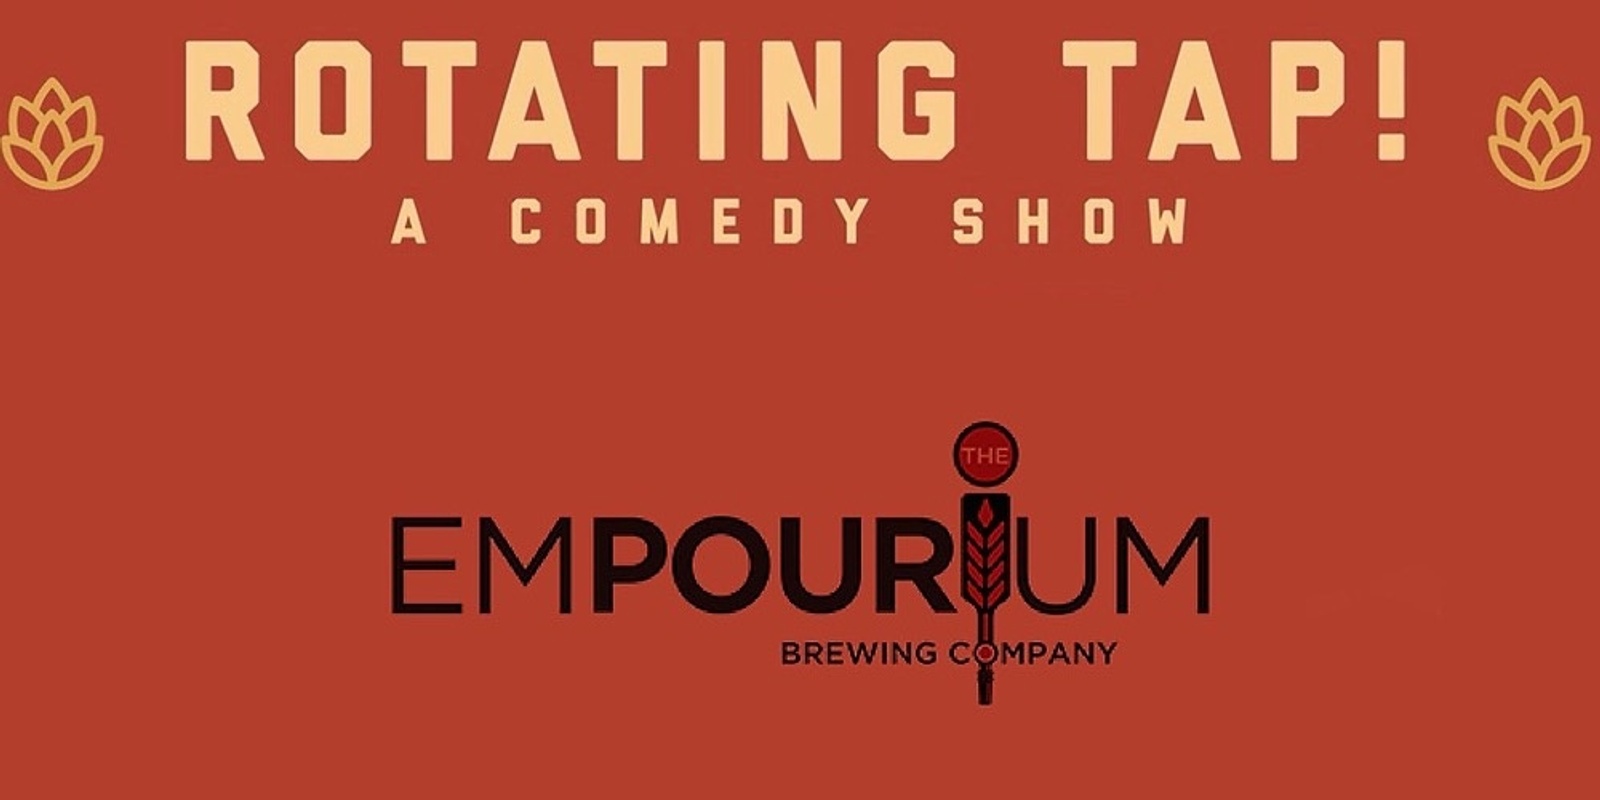 Banner image for Rotating Tap Comedy @ Empourium Brewing Company